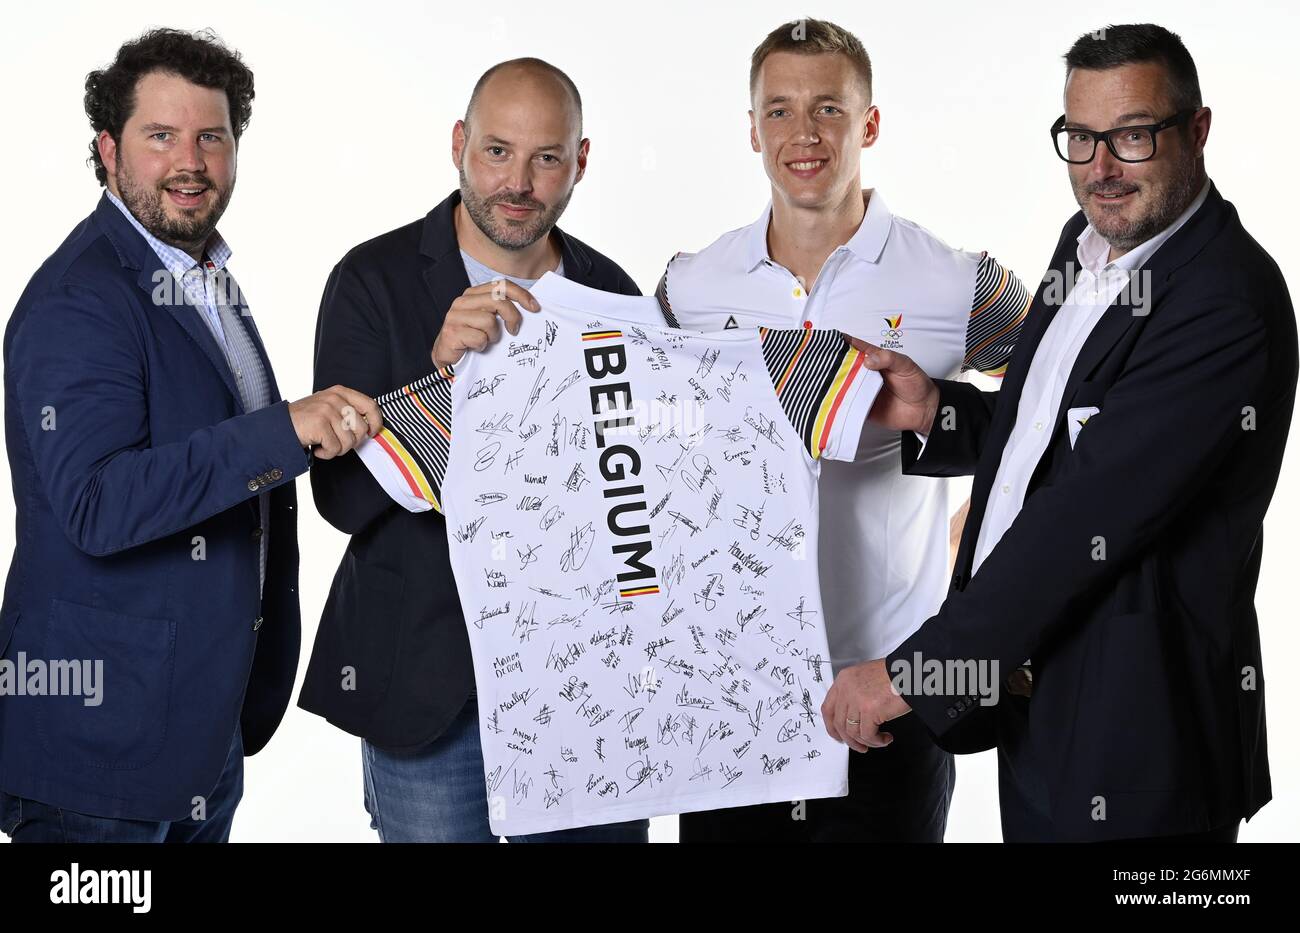 Jerome Paquot, Julien Marchetto of XLG, Belgian Julien Watrin and Dieter Reyntjens pose at a photoshoot for the Belgian Olympic Committee BOIC - COIB Stock Photo